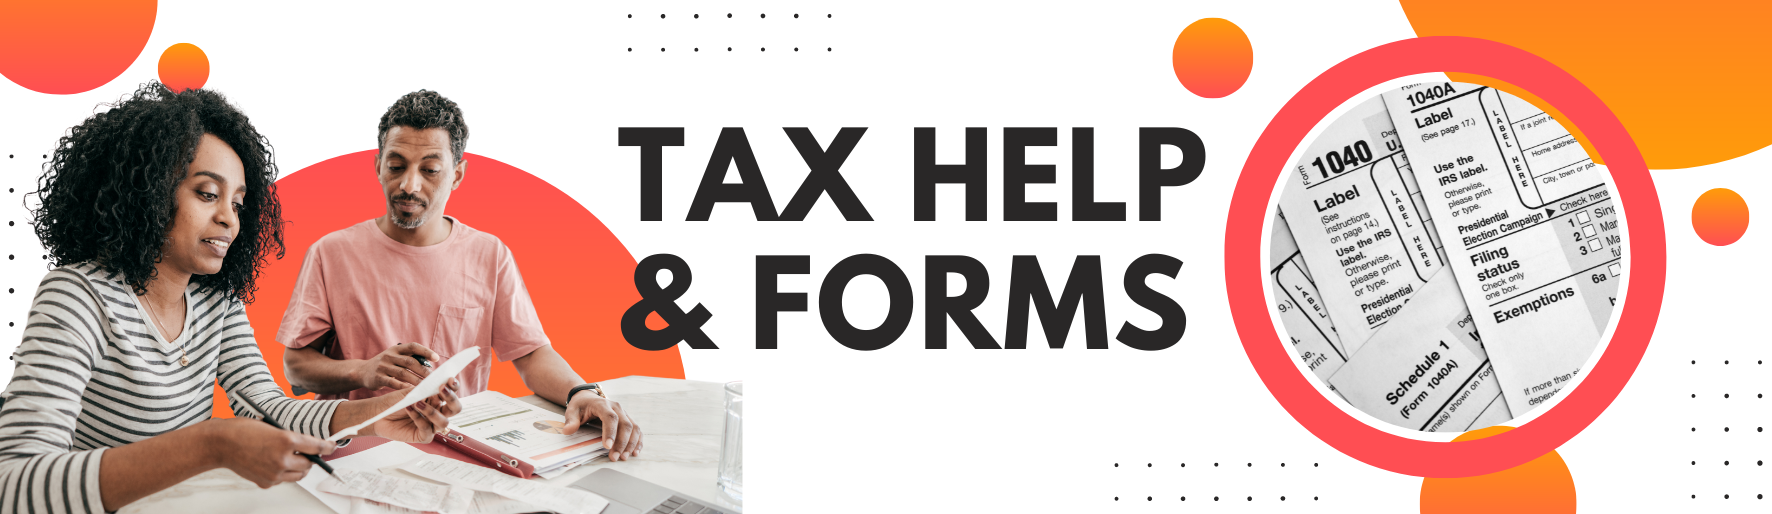 Tax Help & Forms